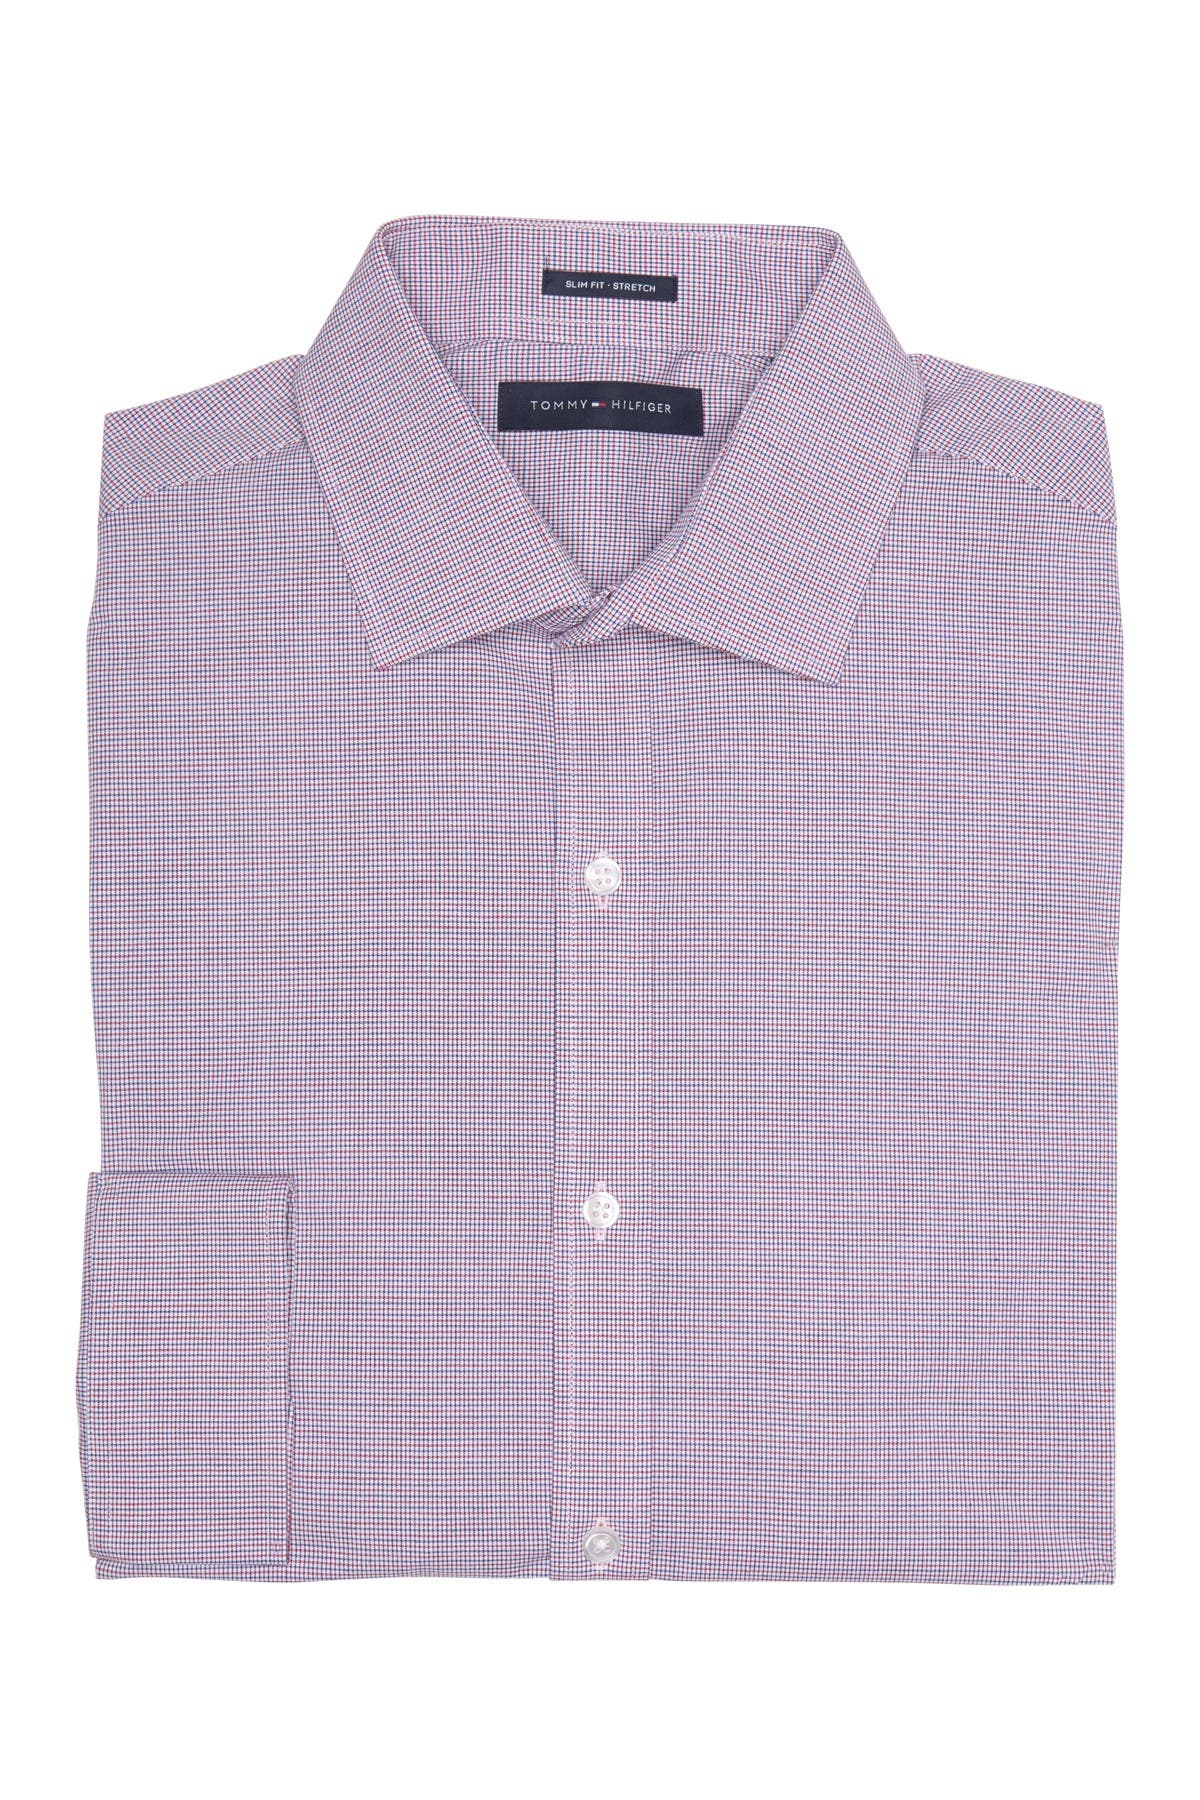 tommy hilfiger fitted dress shirt